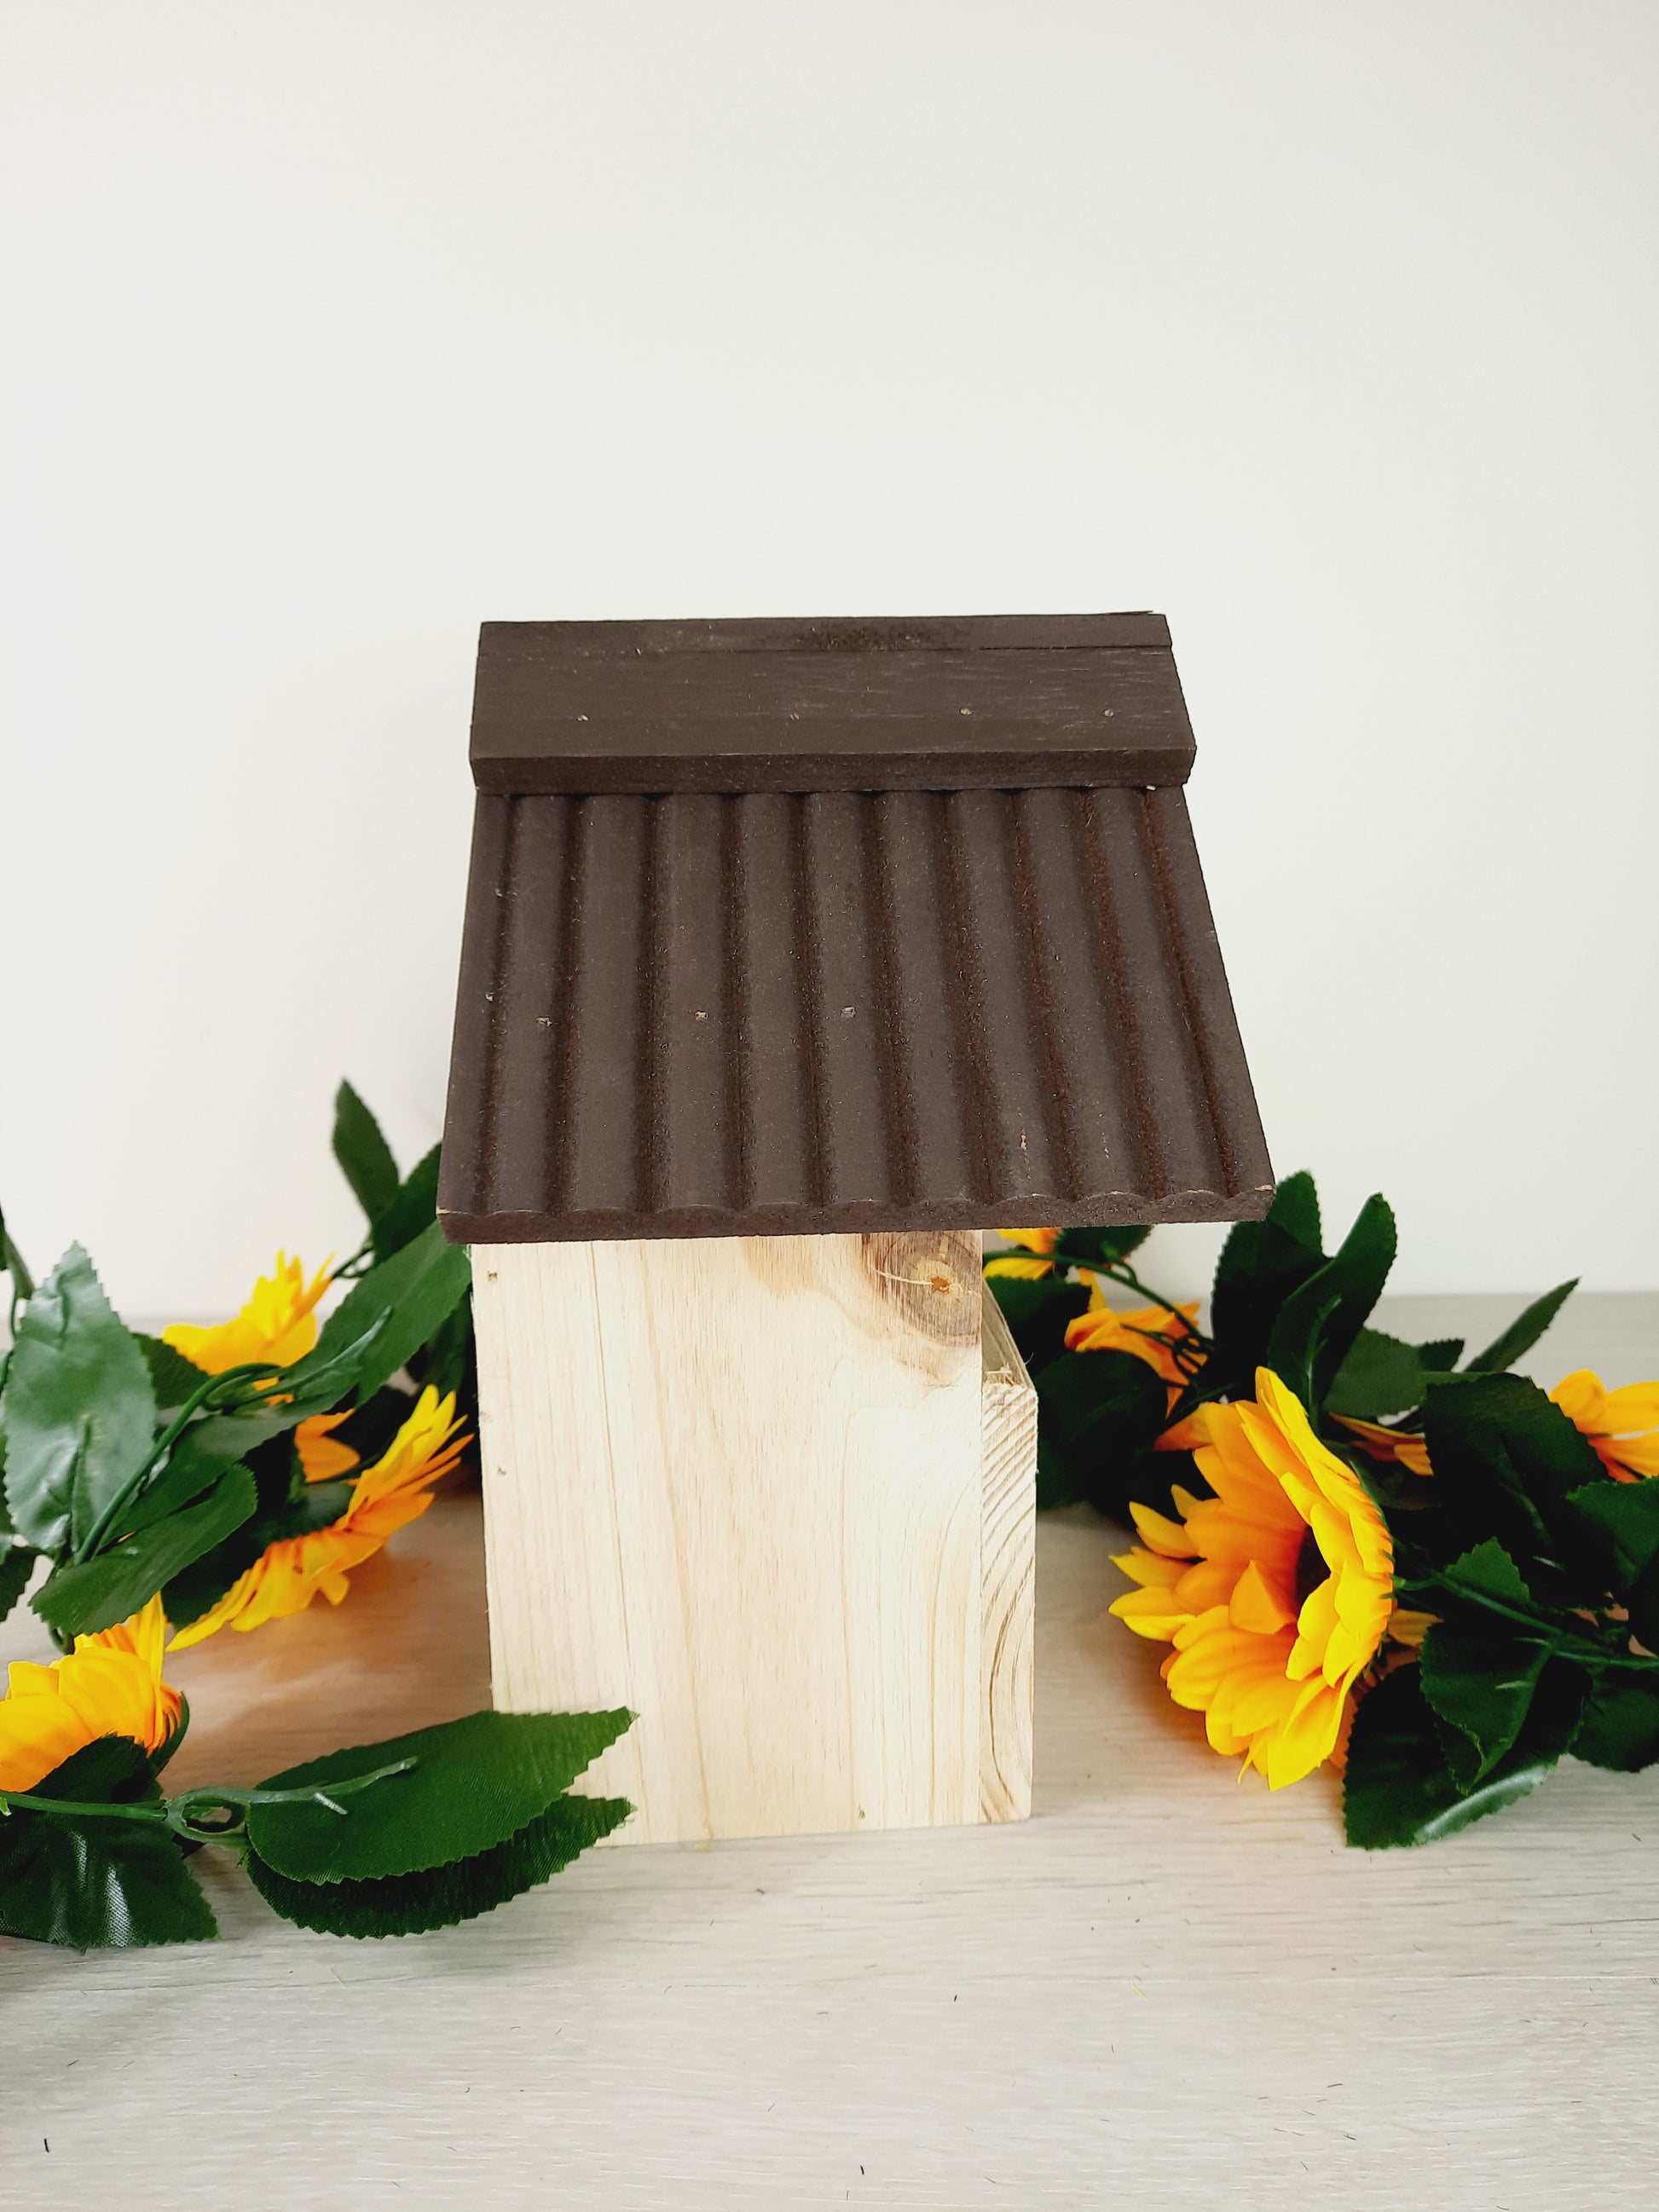 Side profile of the bird nesting box with faux sunflowers as props.